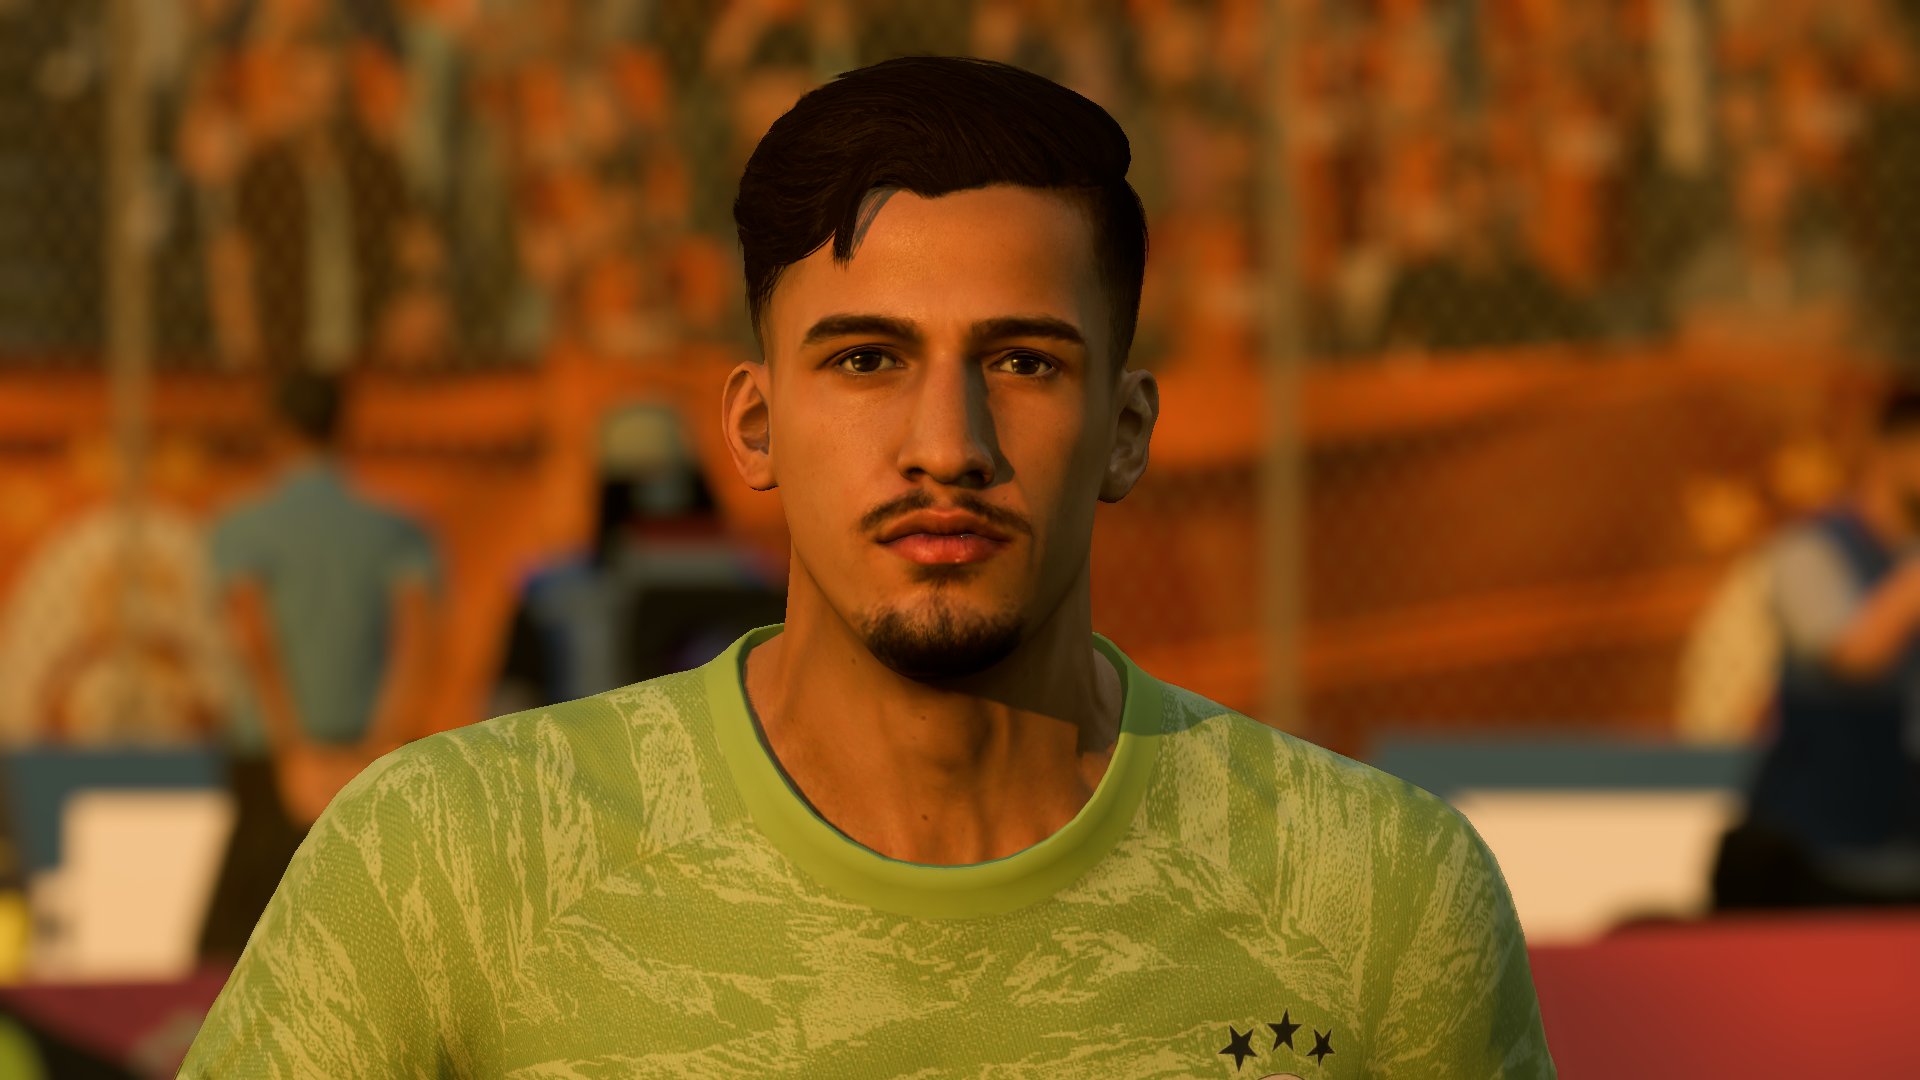 Facemaker Emrekaya On Twitter Altay Bayindir Fenerbahce Fifa20 Pc Mod Update Altaybayindir 1 With Rdbm Or Live Editor Assign Real Face Id 197851 For Altay Bayindir Download Https T Co 920typizhj Https T Co Ua3wnpbjqk [ 1080 x 1920 Pixel ]